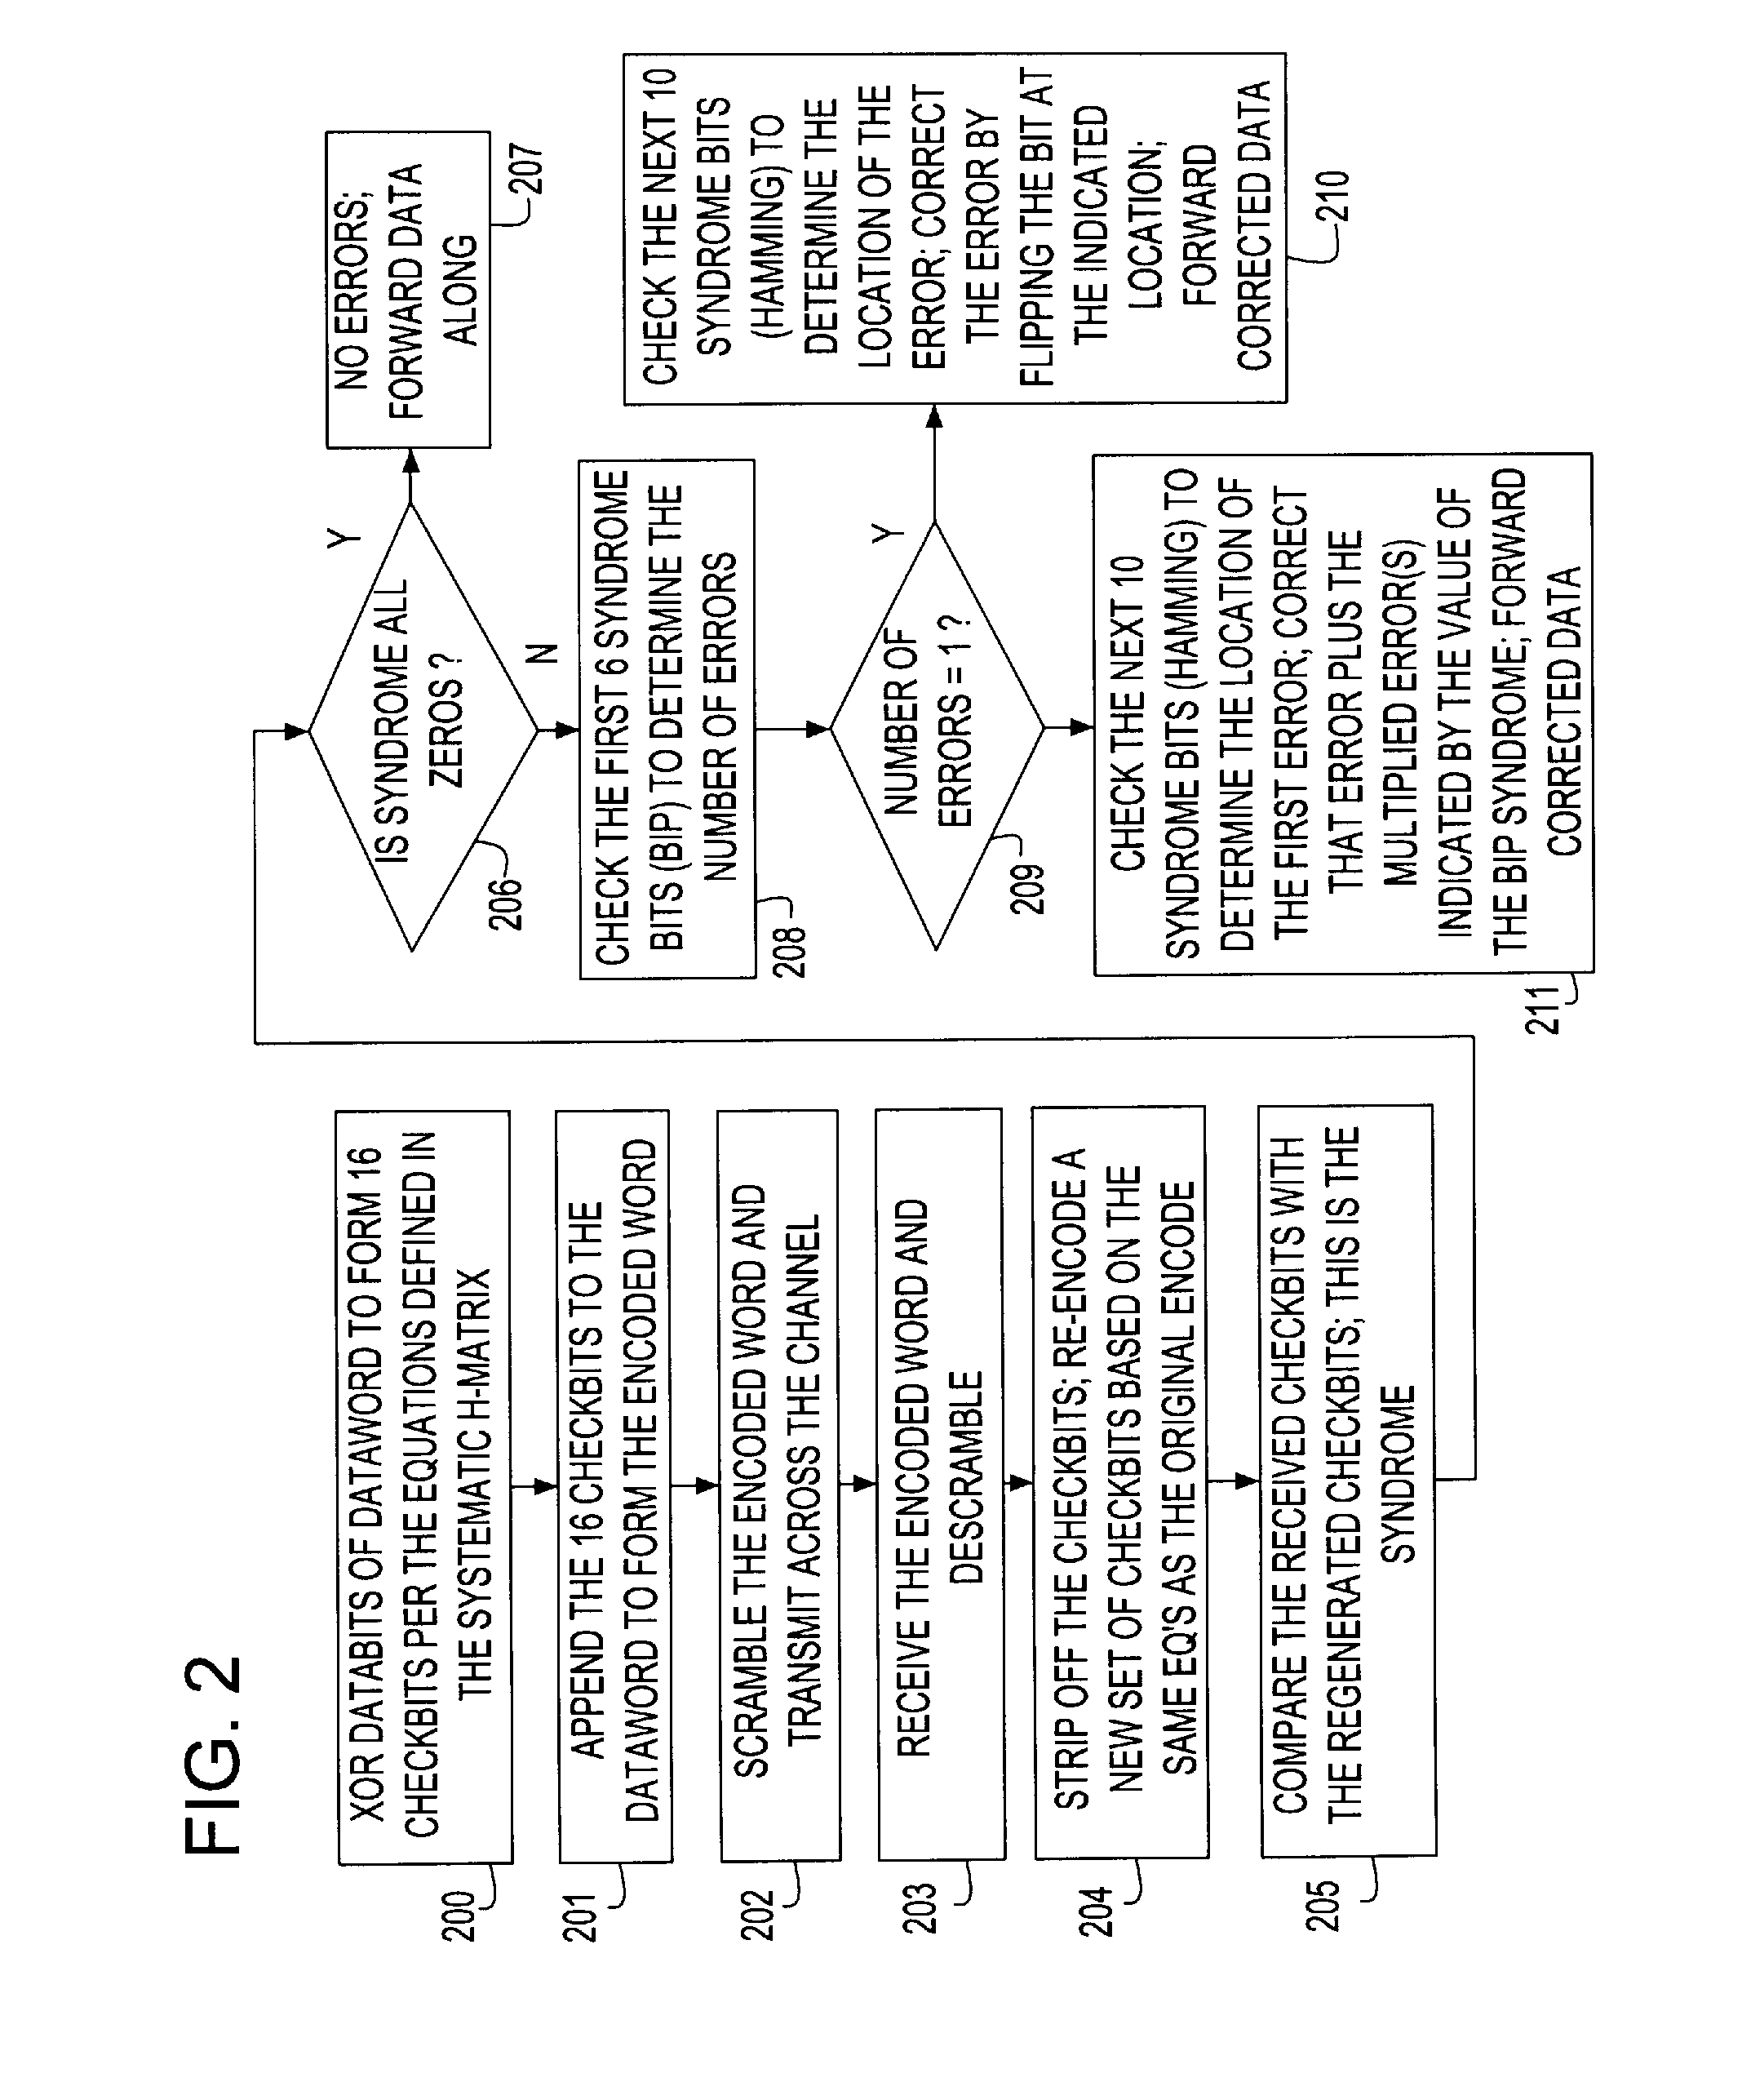 Forward error correction encoding for multiple link transmission capatible with 64b/66b scrambling